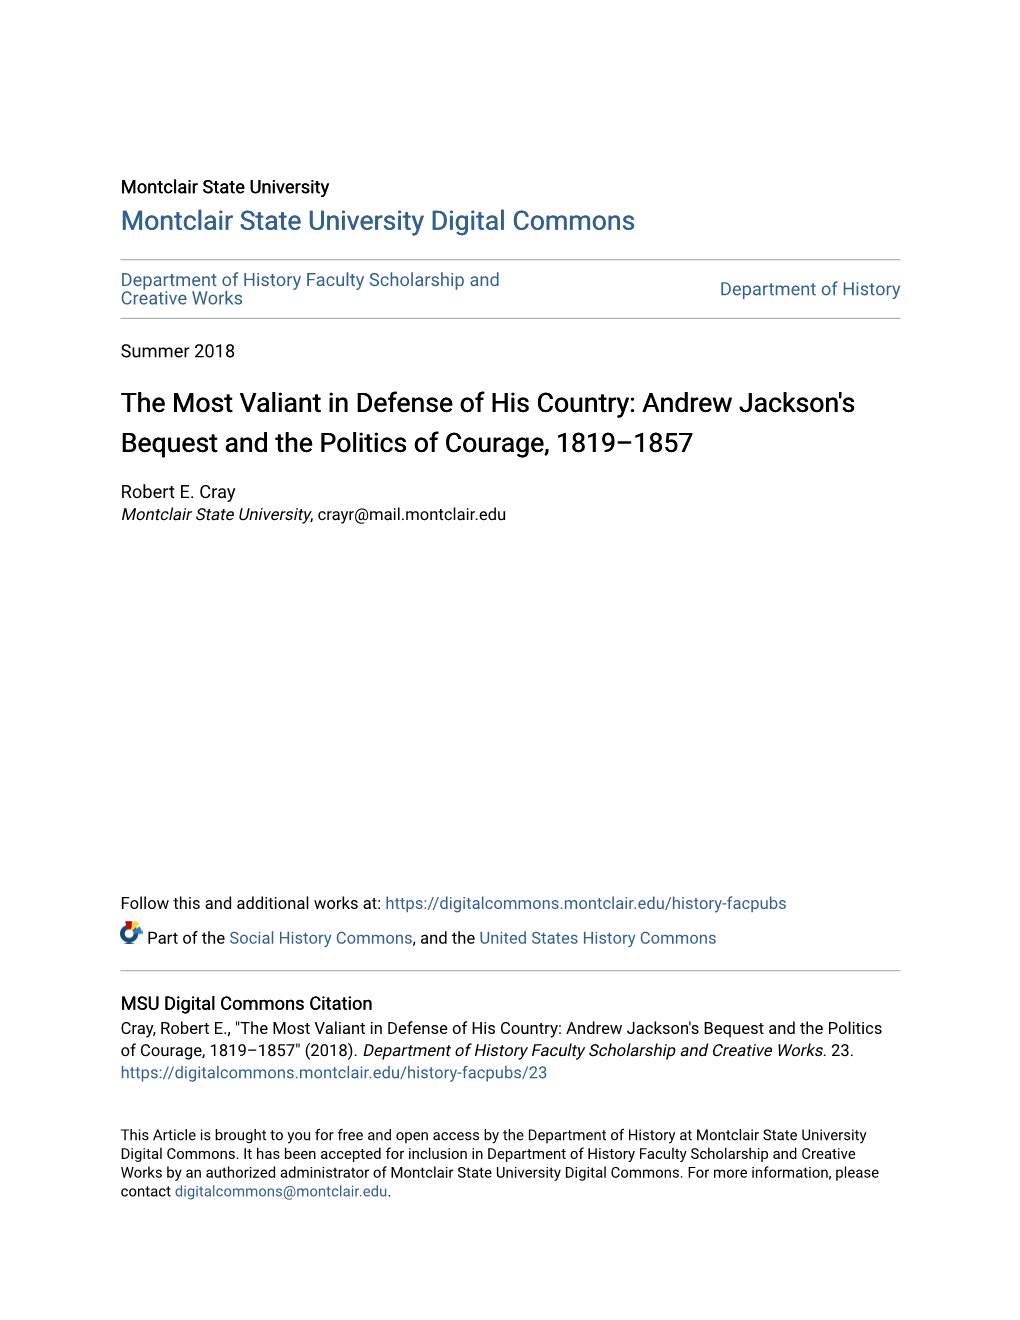 The Most Valiant in Defense of His Country: Andrew Jackson's Bequest and the Politics of Courage, 1819–1857